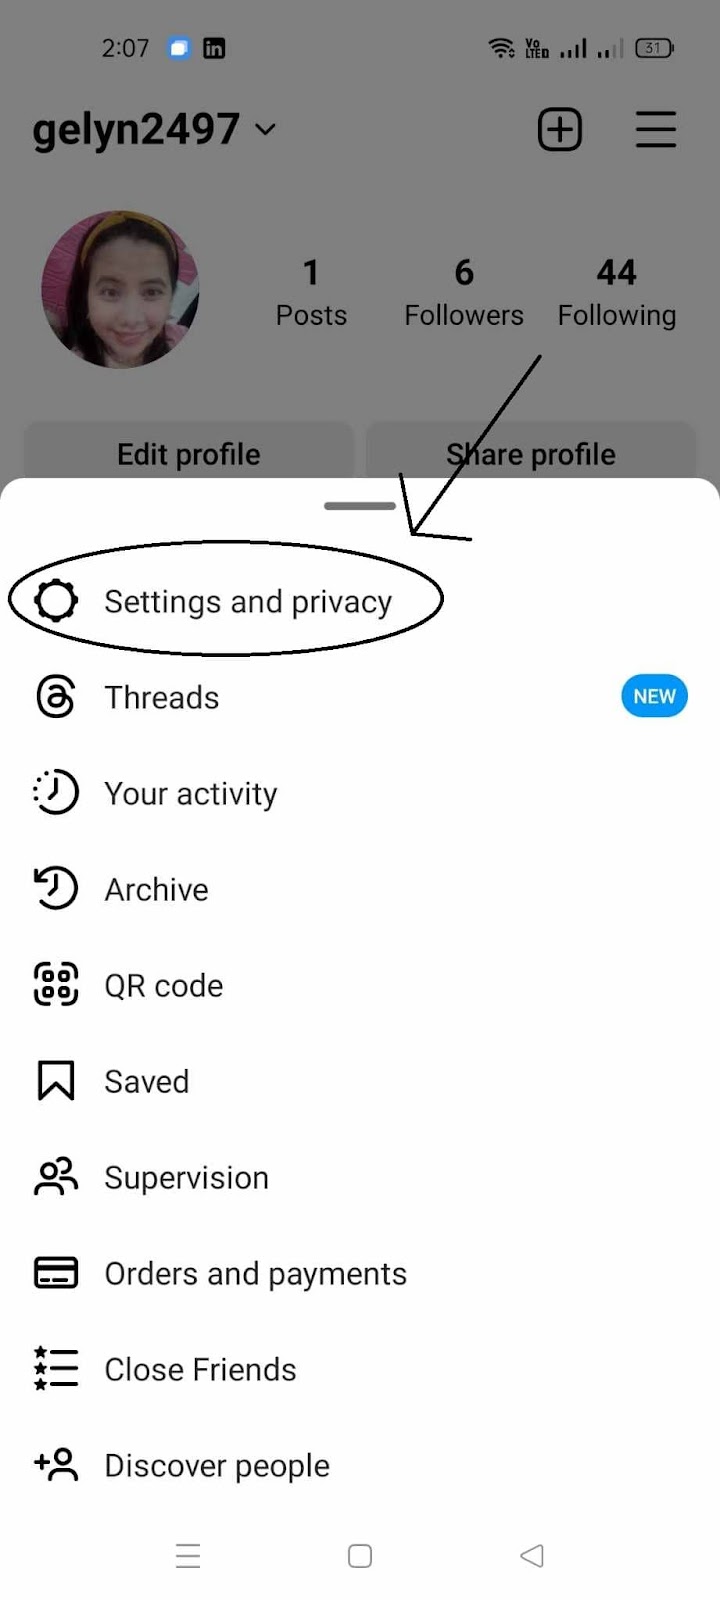 Can’t be Invited as a Collaborator yet - Settings and Privacy